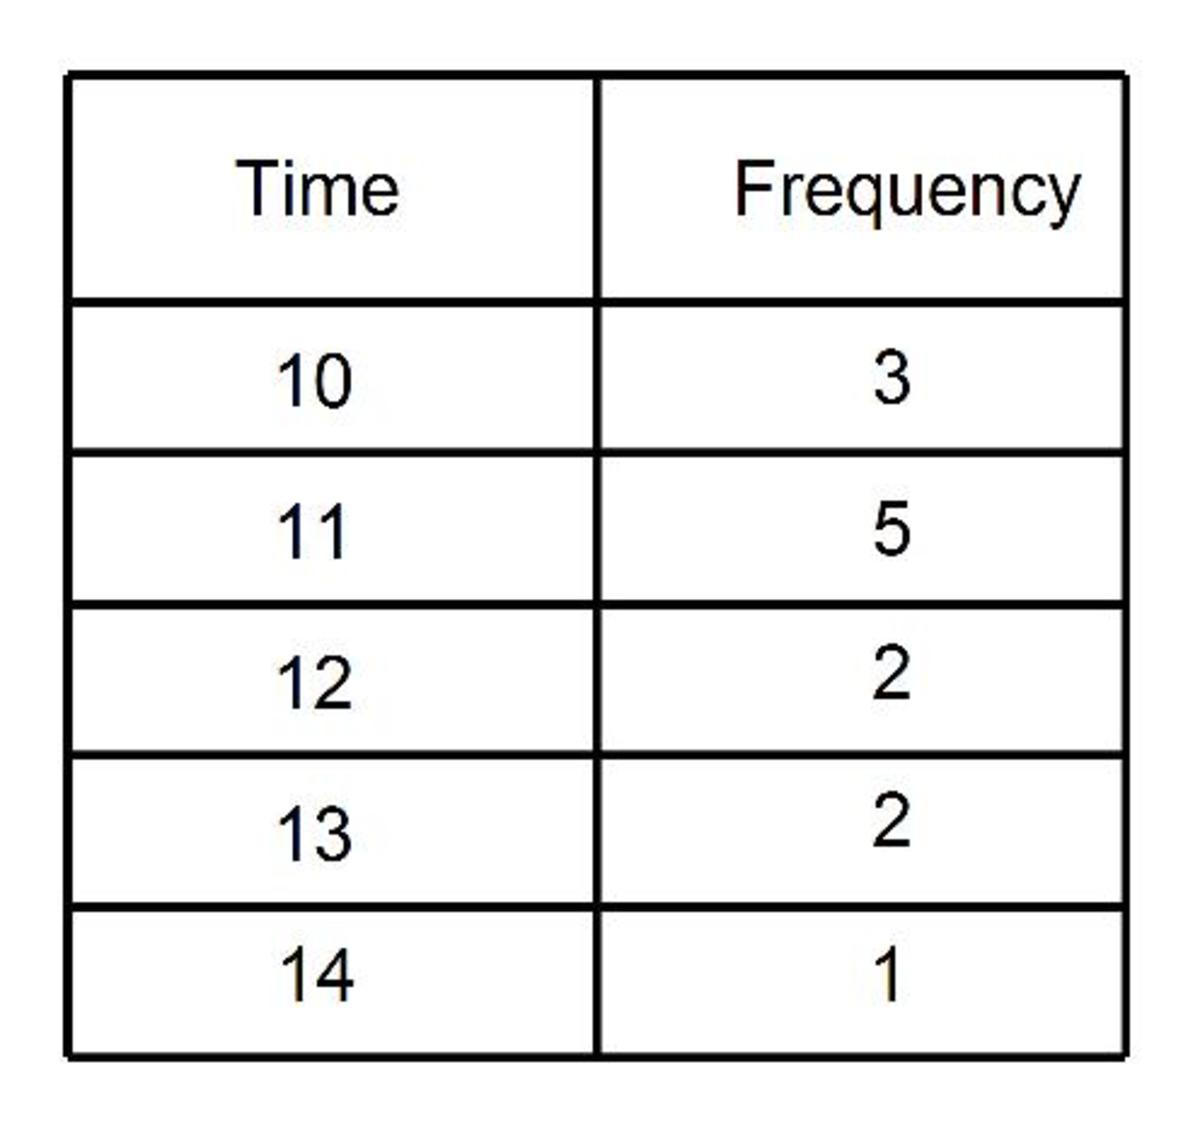 mean-from-a-frequency-table-how-to-work-out-the-mean-average-from-a-frequency-table